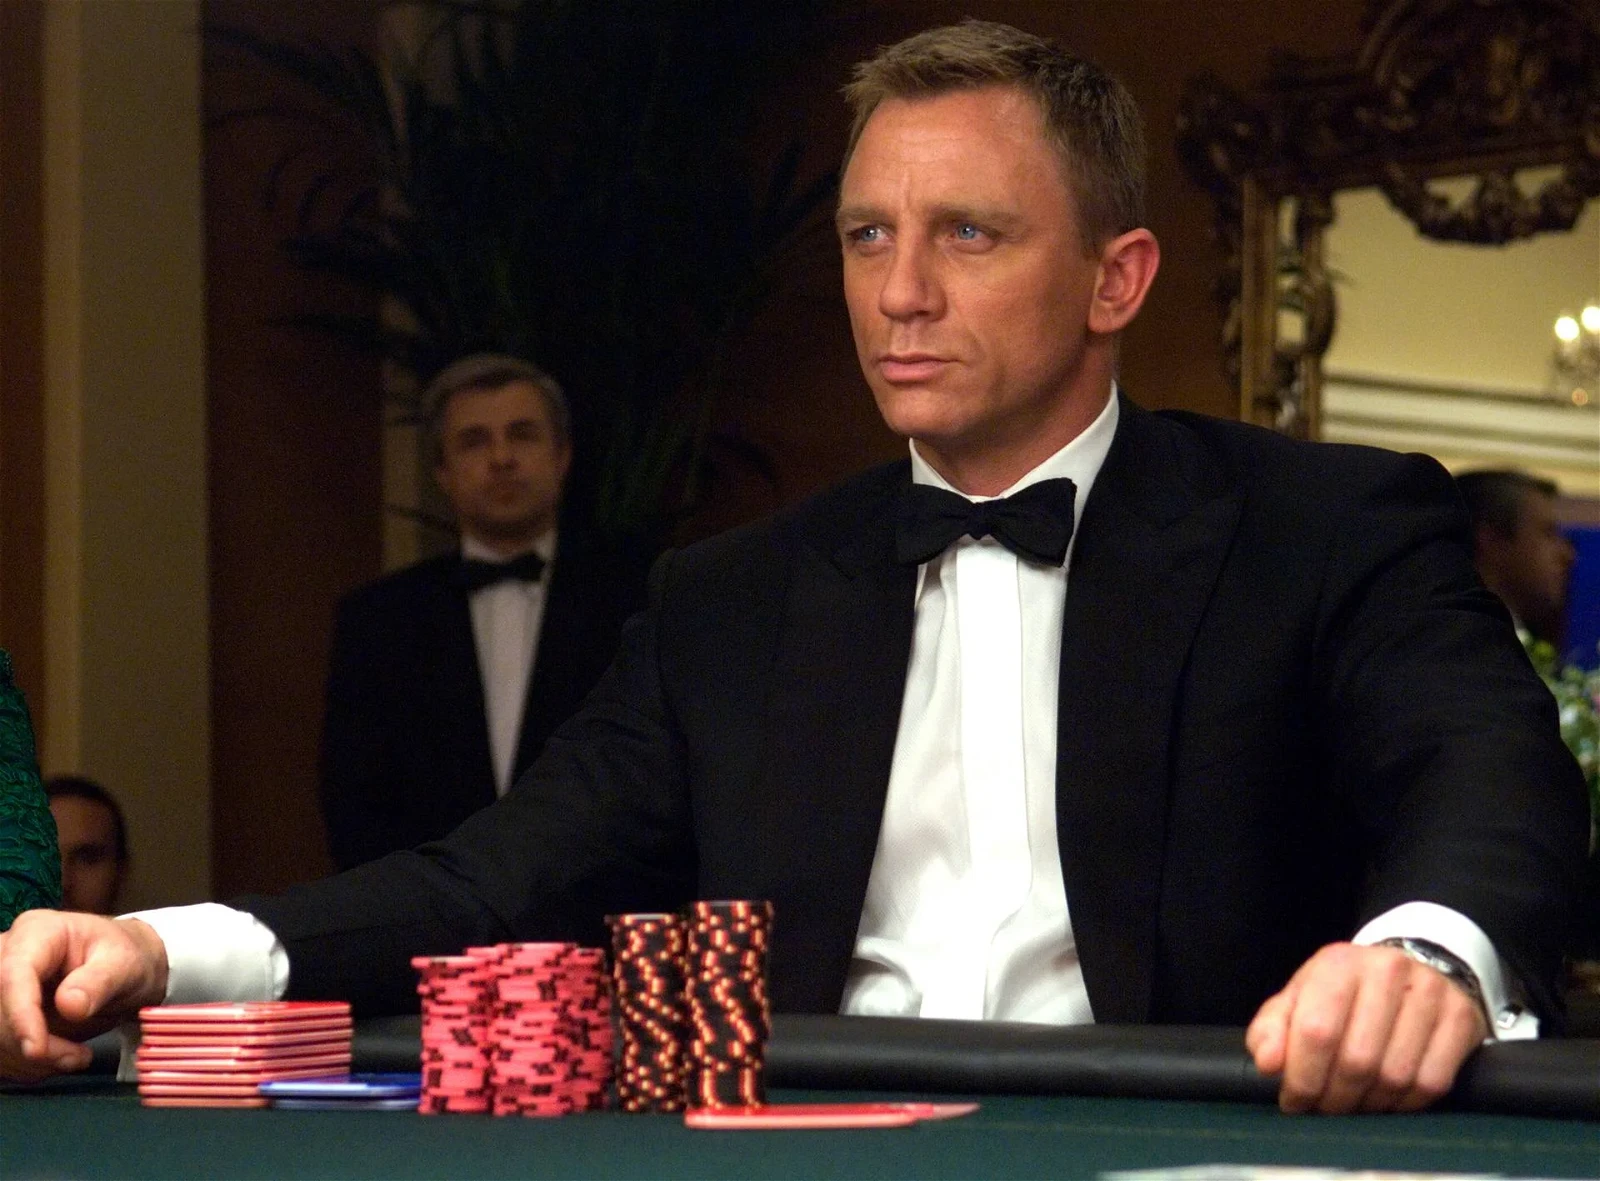 Daniel Craig as James Bond in a still from the 007 franchise